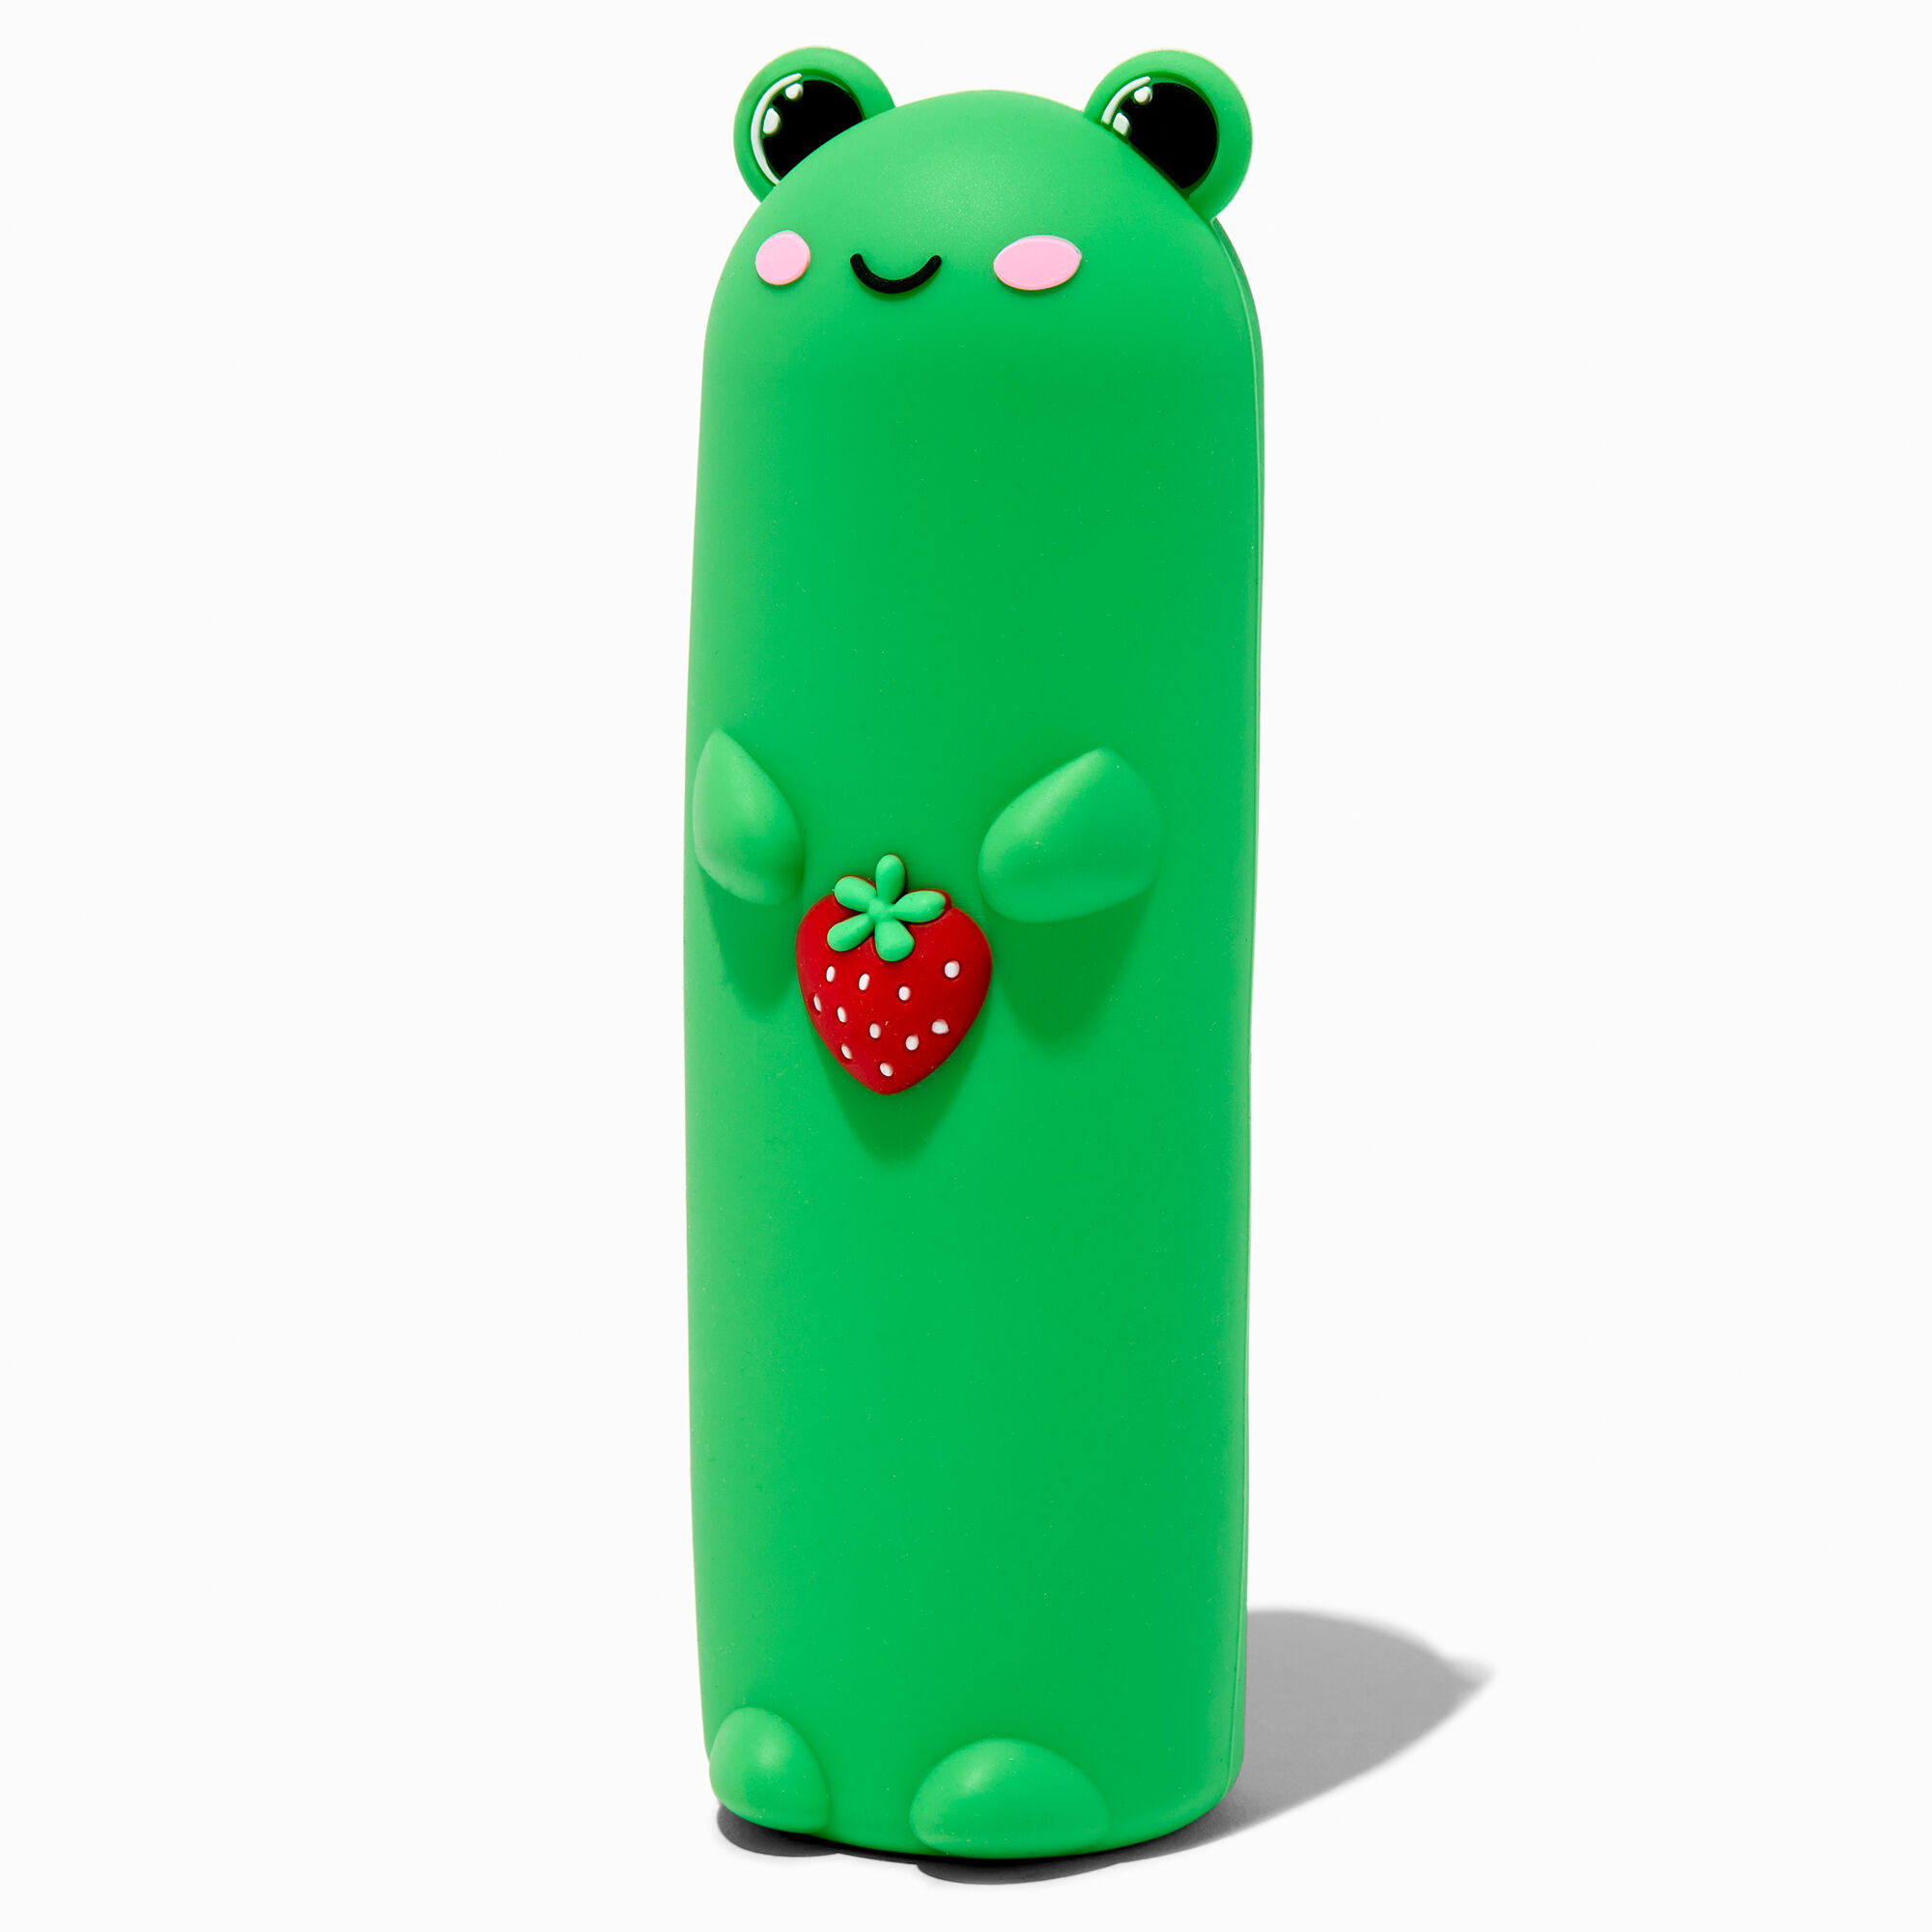 View Claires Strawberry Frog Pencil Case information